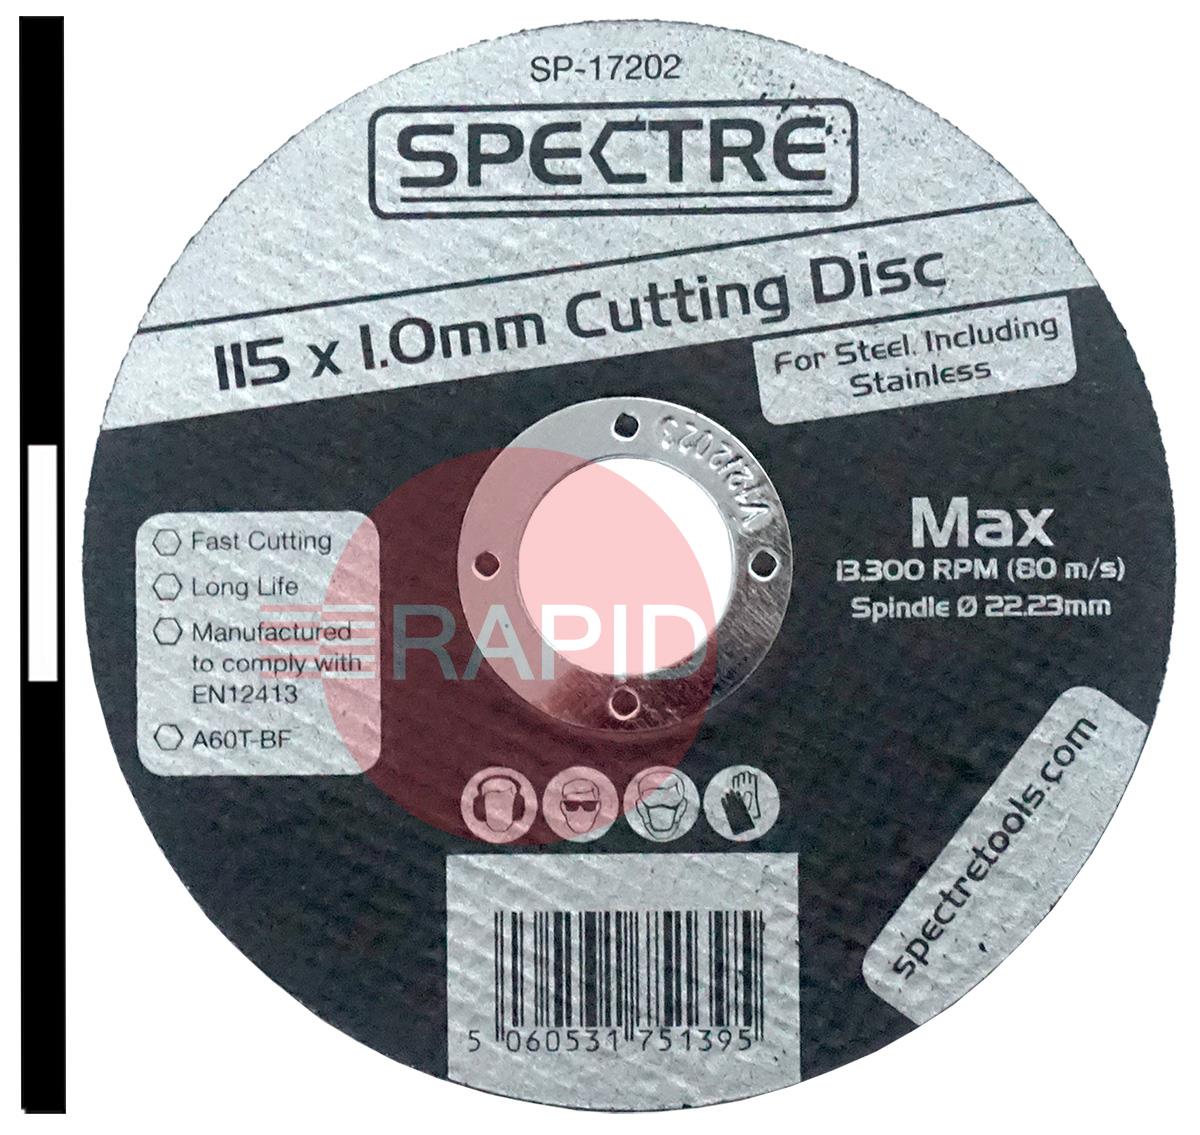 SP-17202  Spectre 115mm (4.5) Slitting Cutting Disc 1mm Thick. Grade A60T-BF for Steel & Stainless Steel.